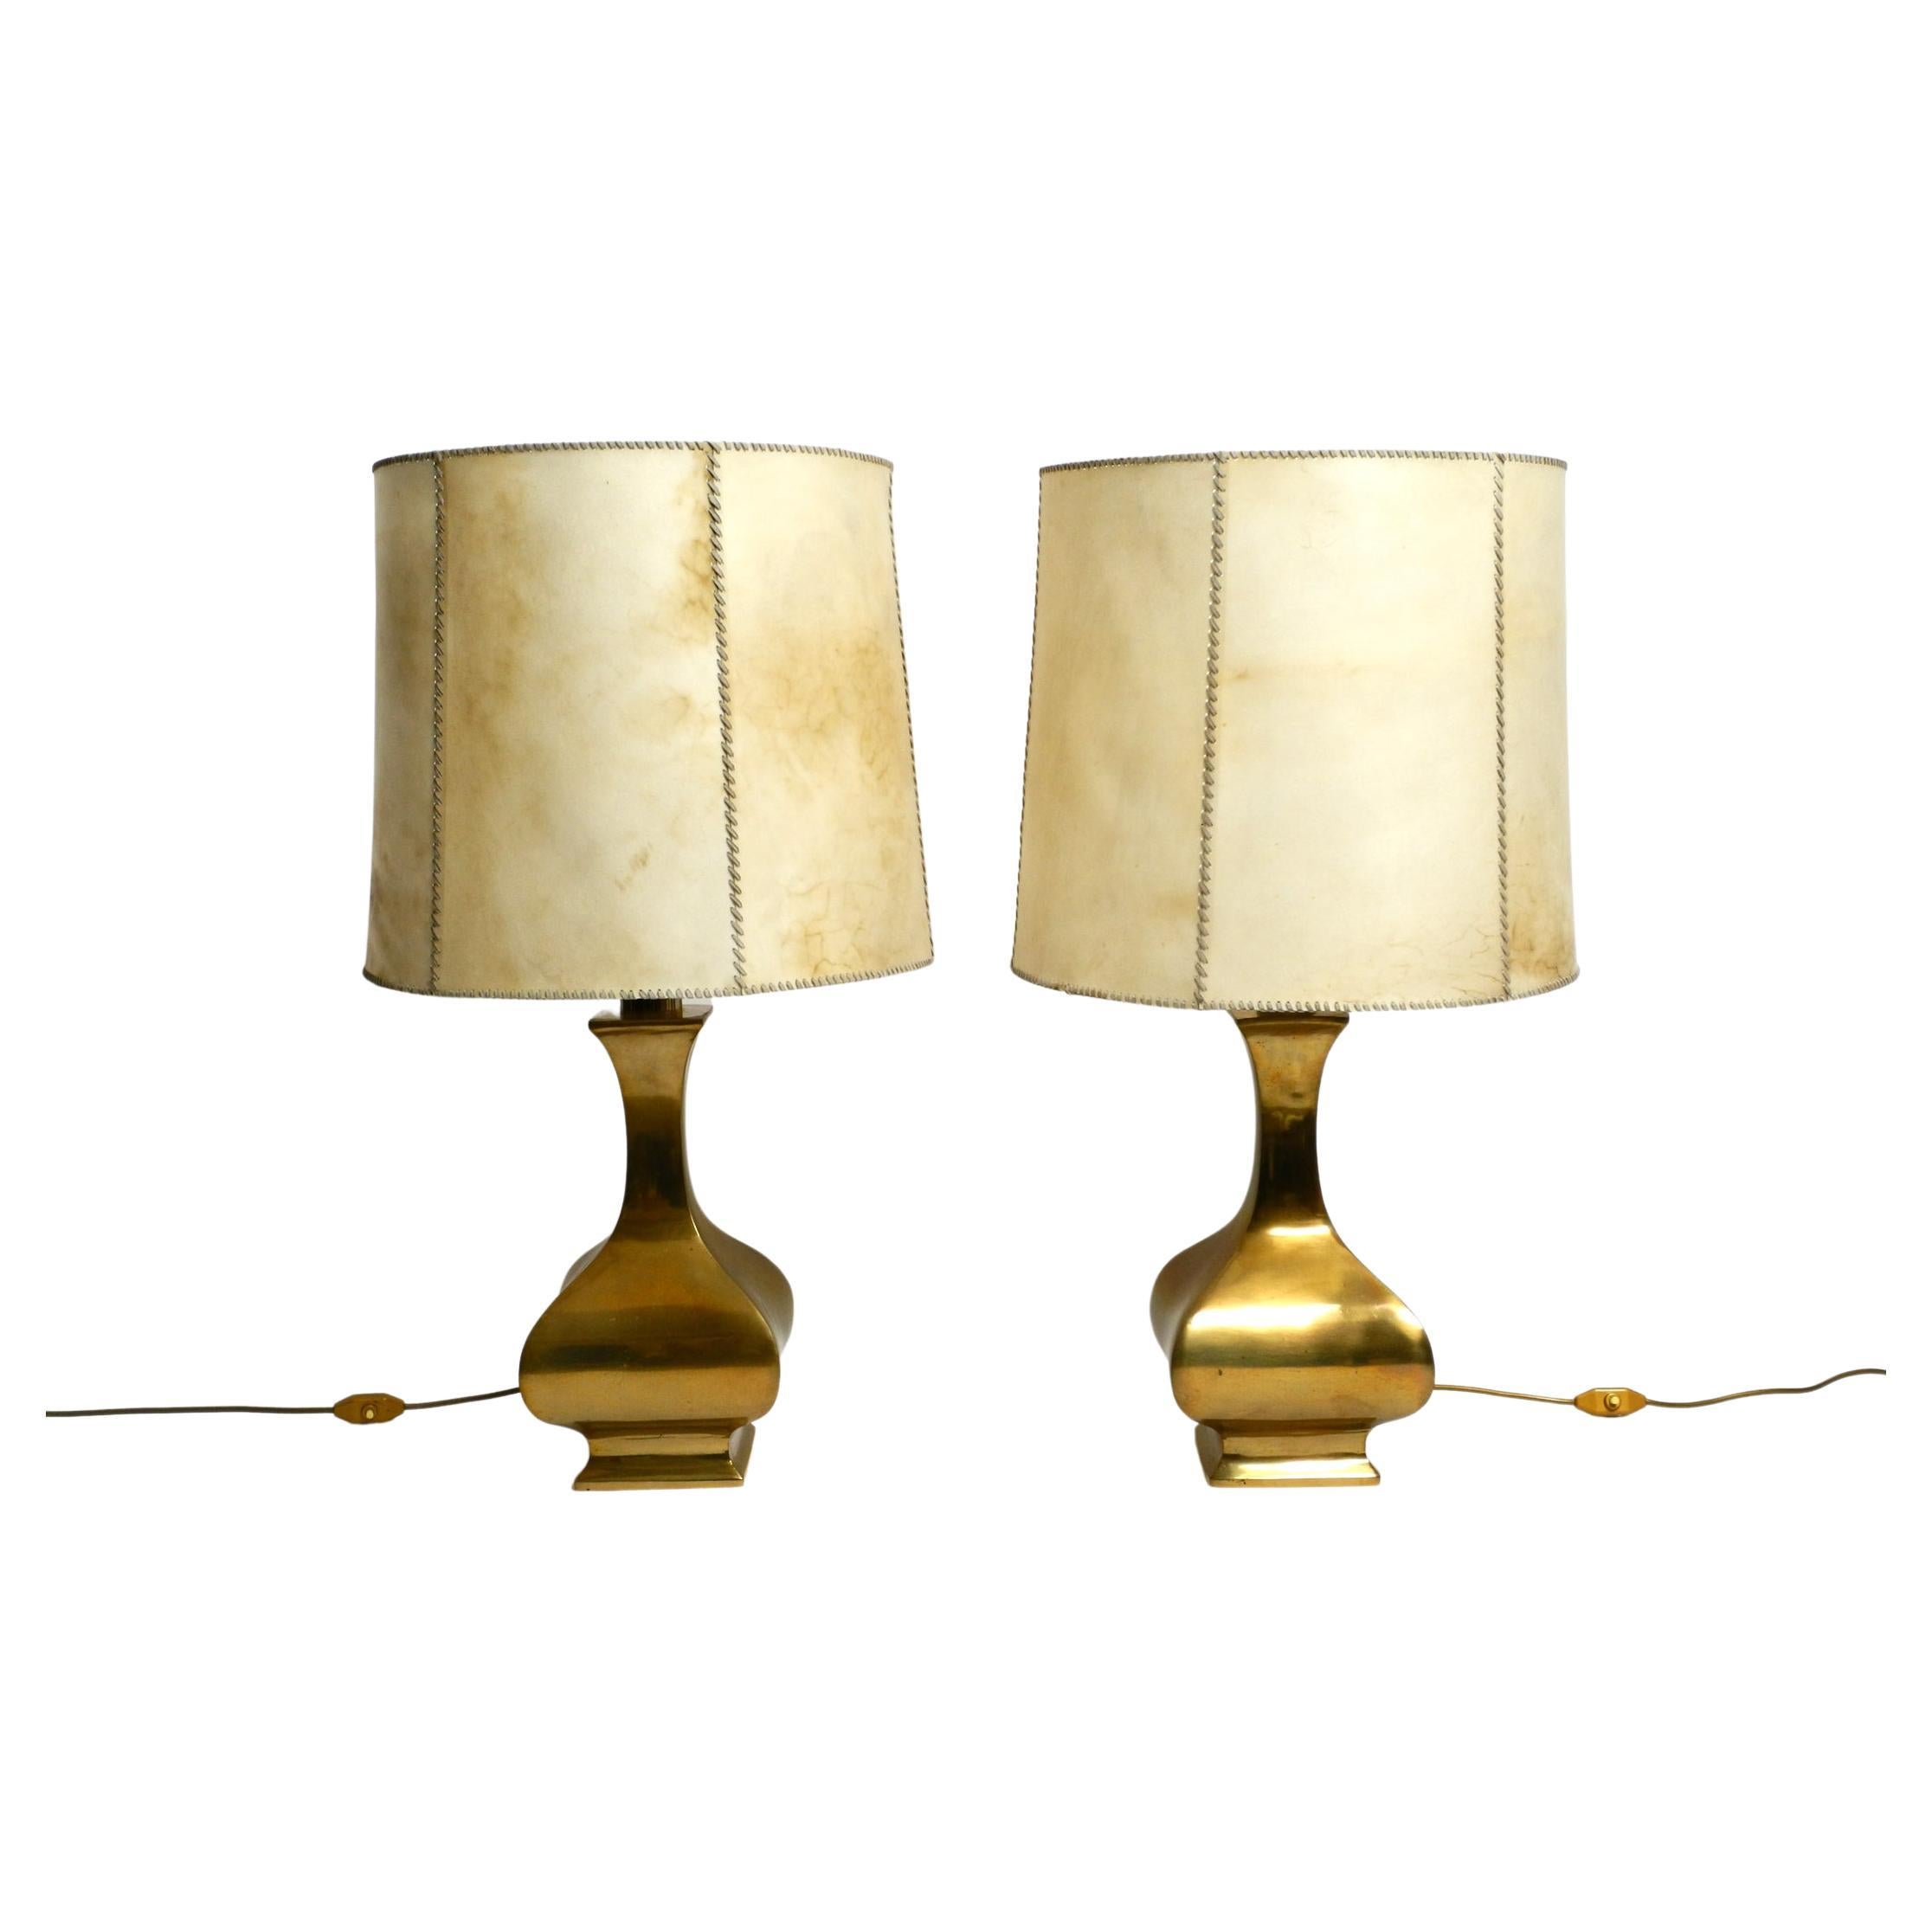 Pair of Very Large, Extraordinary 1950s Italian Brass Table Lamps For Sale